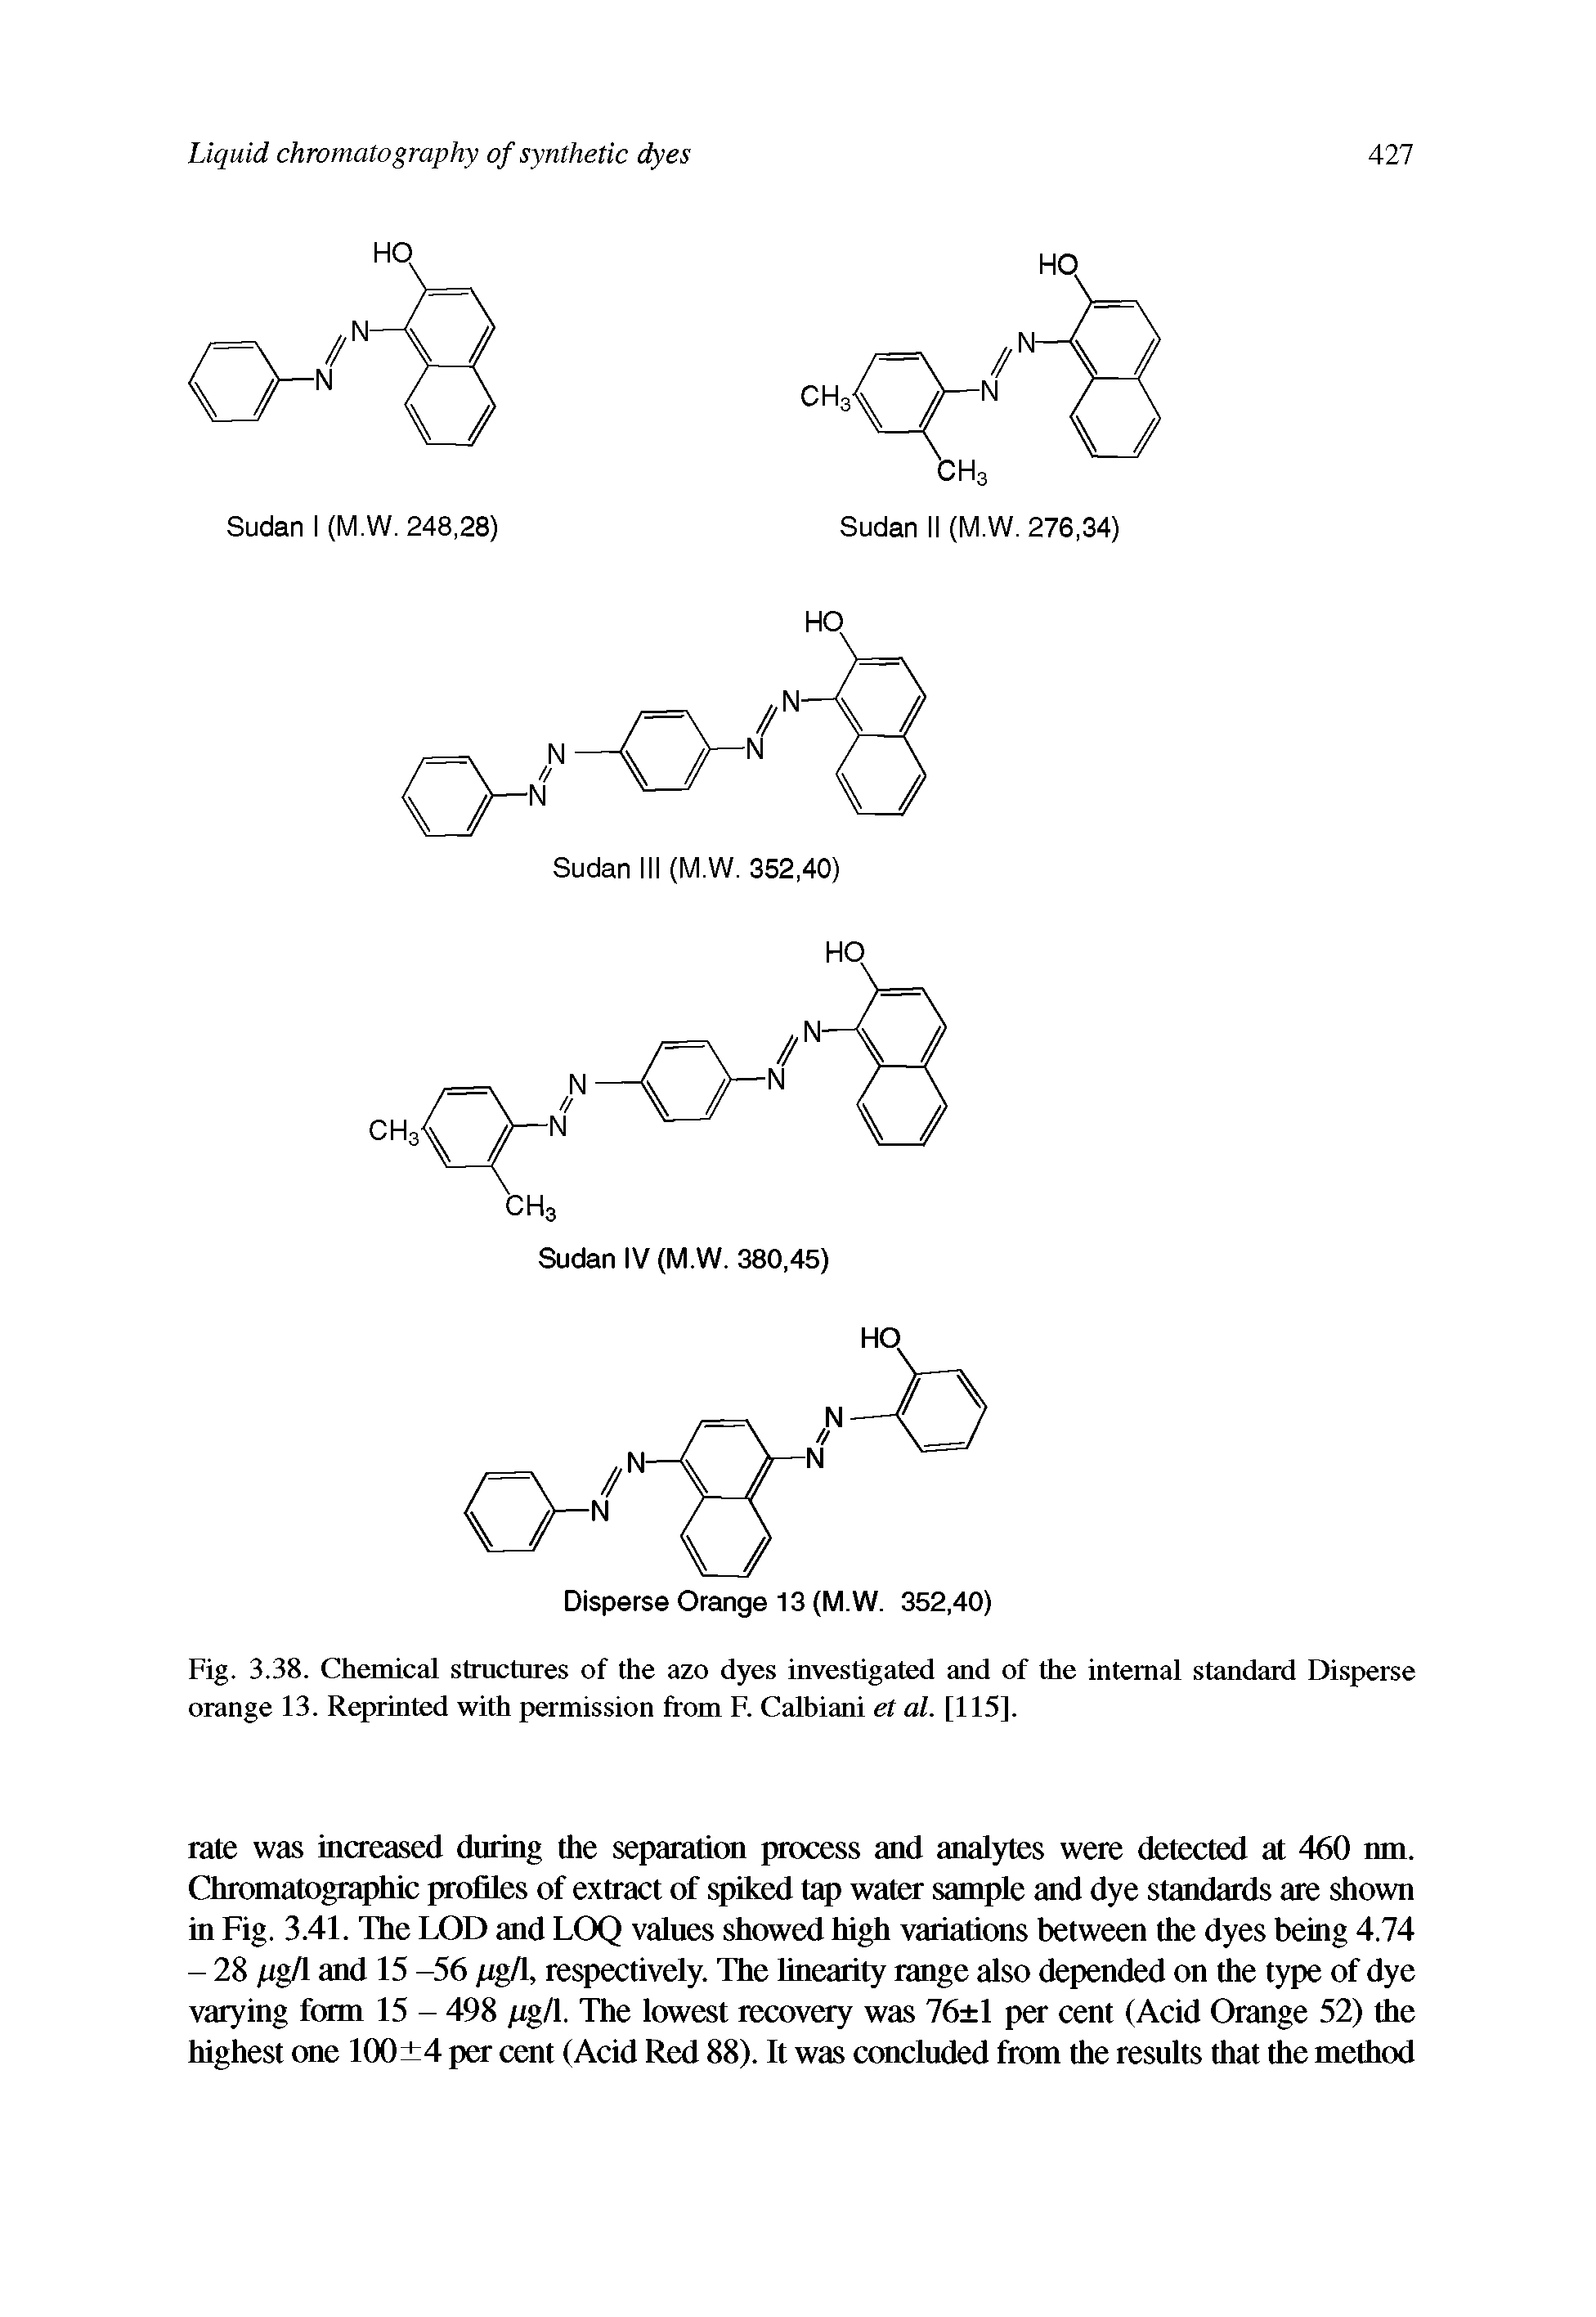 Fig. 3.38. Chemical structures of the azo dyes investigated and of the internal standard Disperse orange 13. Reprinted with permission from F. Calbiani el al. [115].